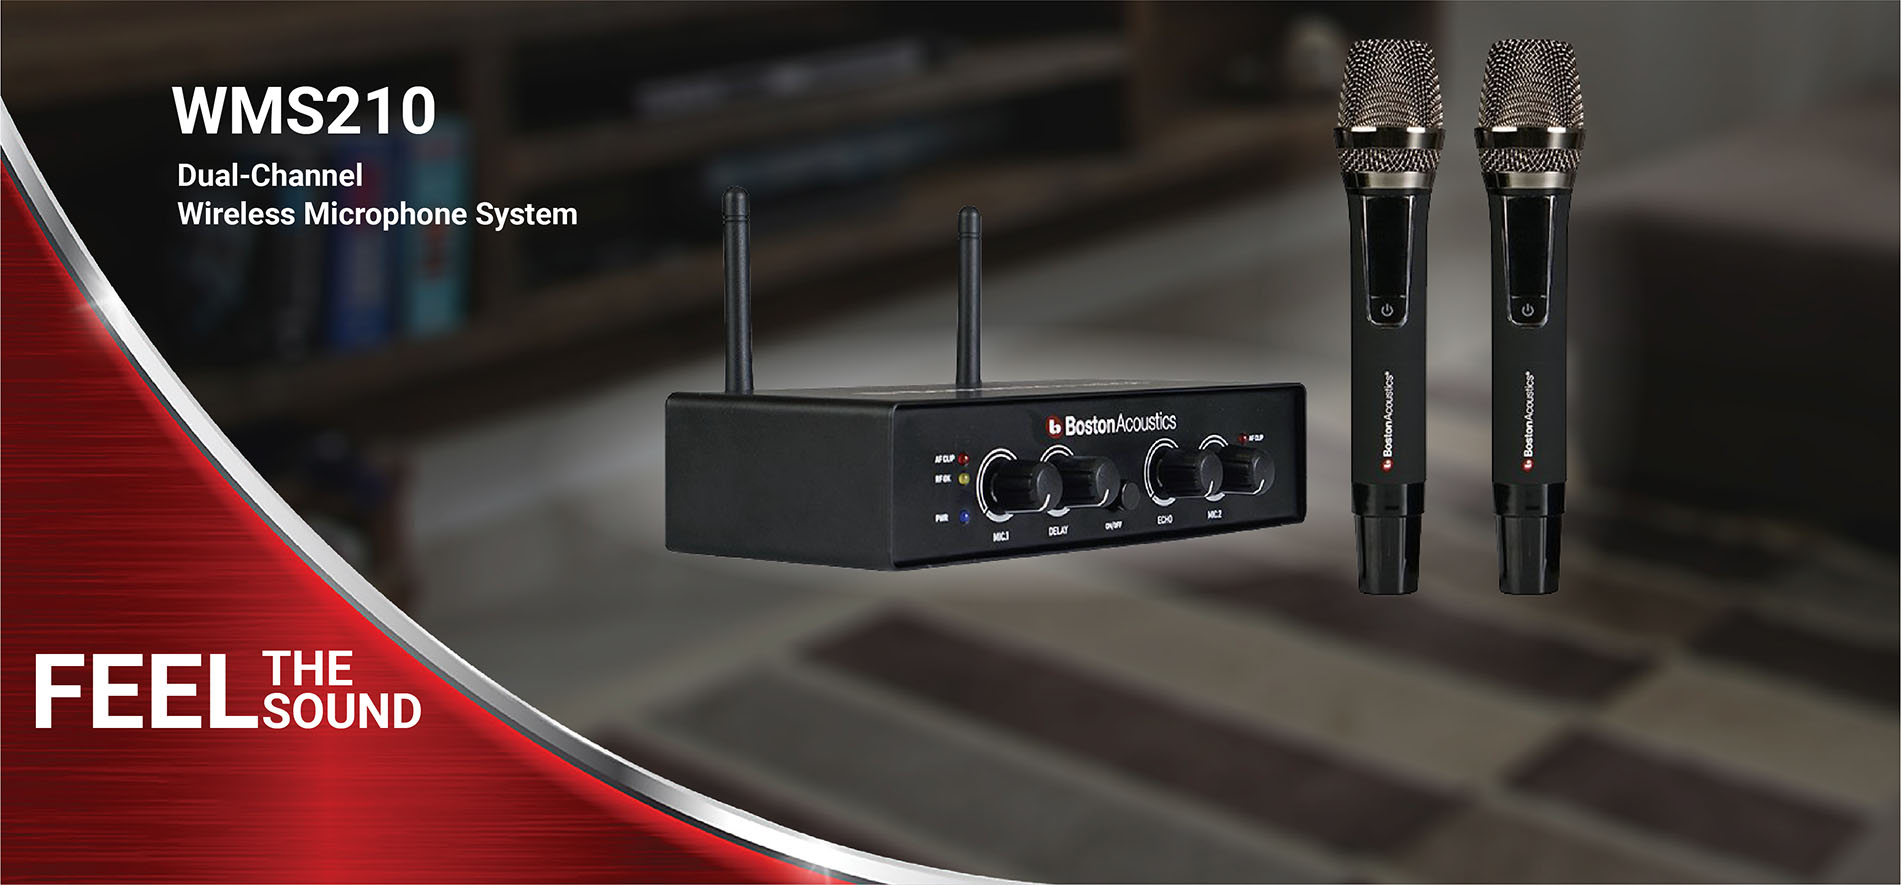 Dual-Channel Wireless Microphone System